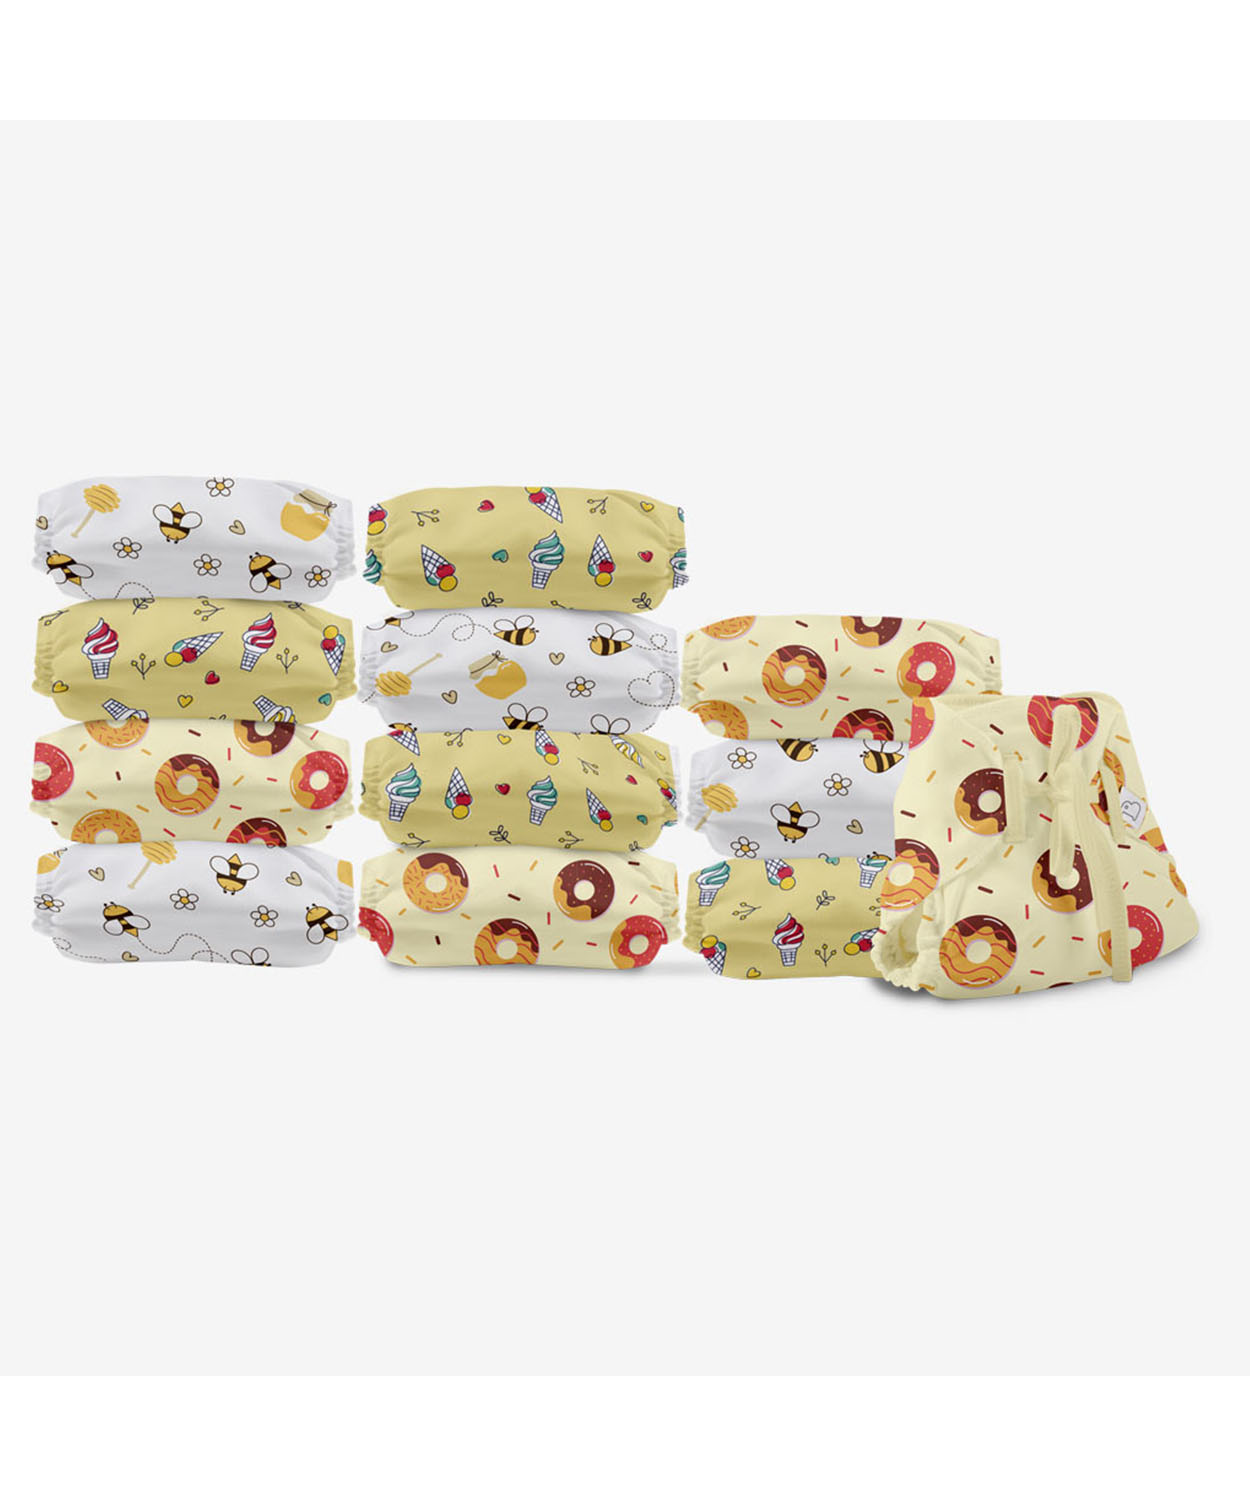 SuperBottoms Dry Feel Langot - Pack of 12- Organic Cotton Padded langot with Gentle Elastics & a SuperDryFeel Layer on top (Sweet Tooth)